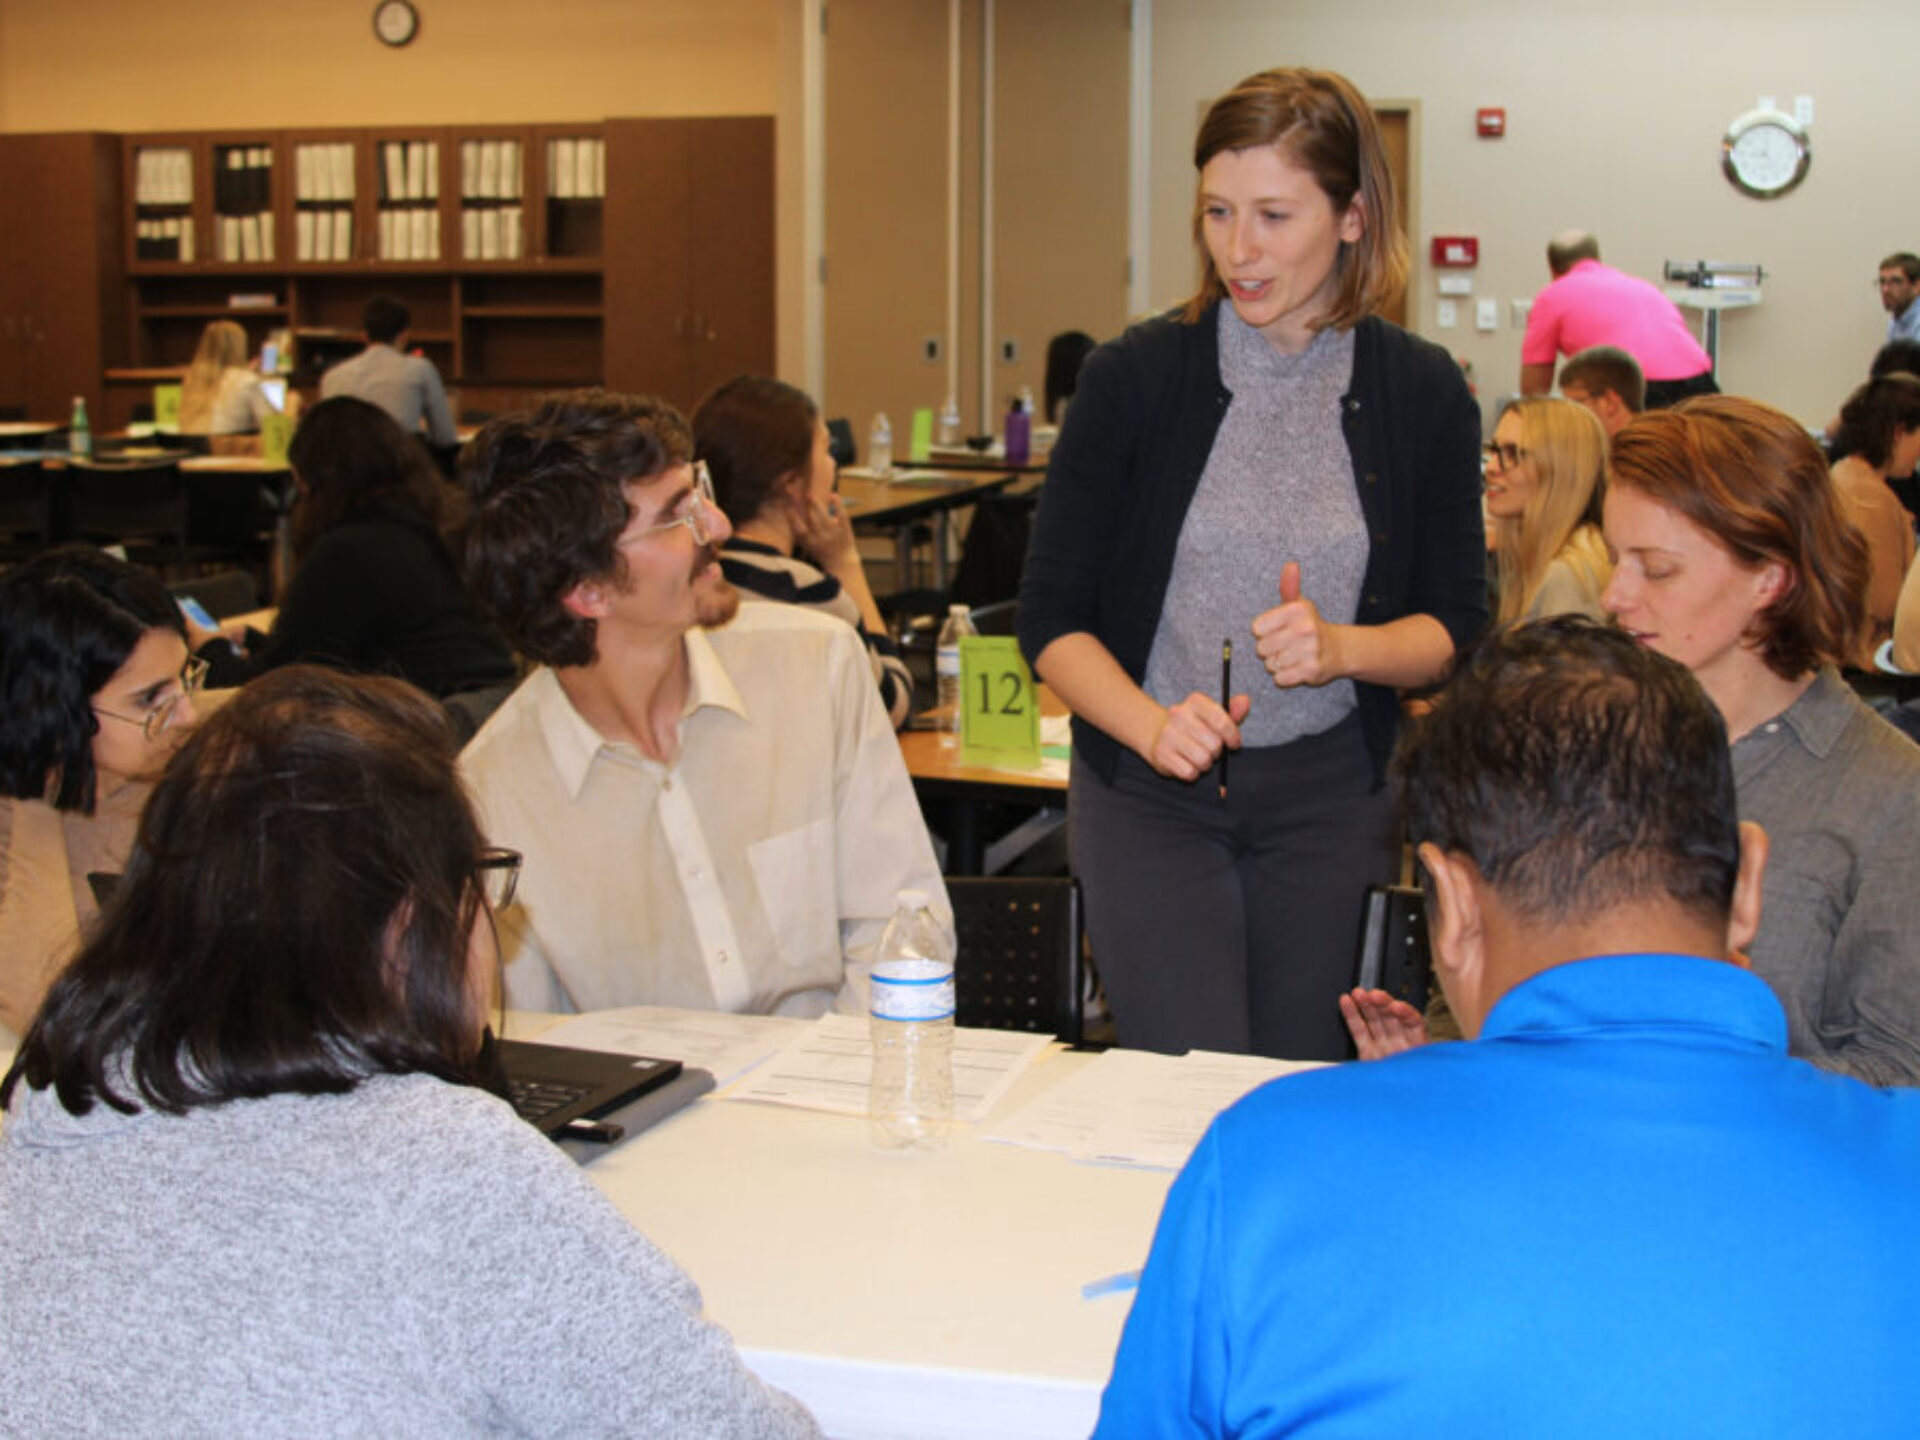 Eva Sikes standing and speaking to five students seated at a table during Pro Bono in January 2020.